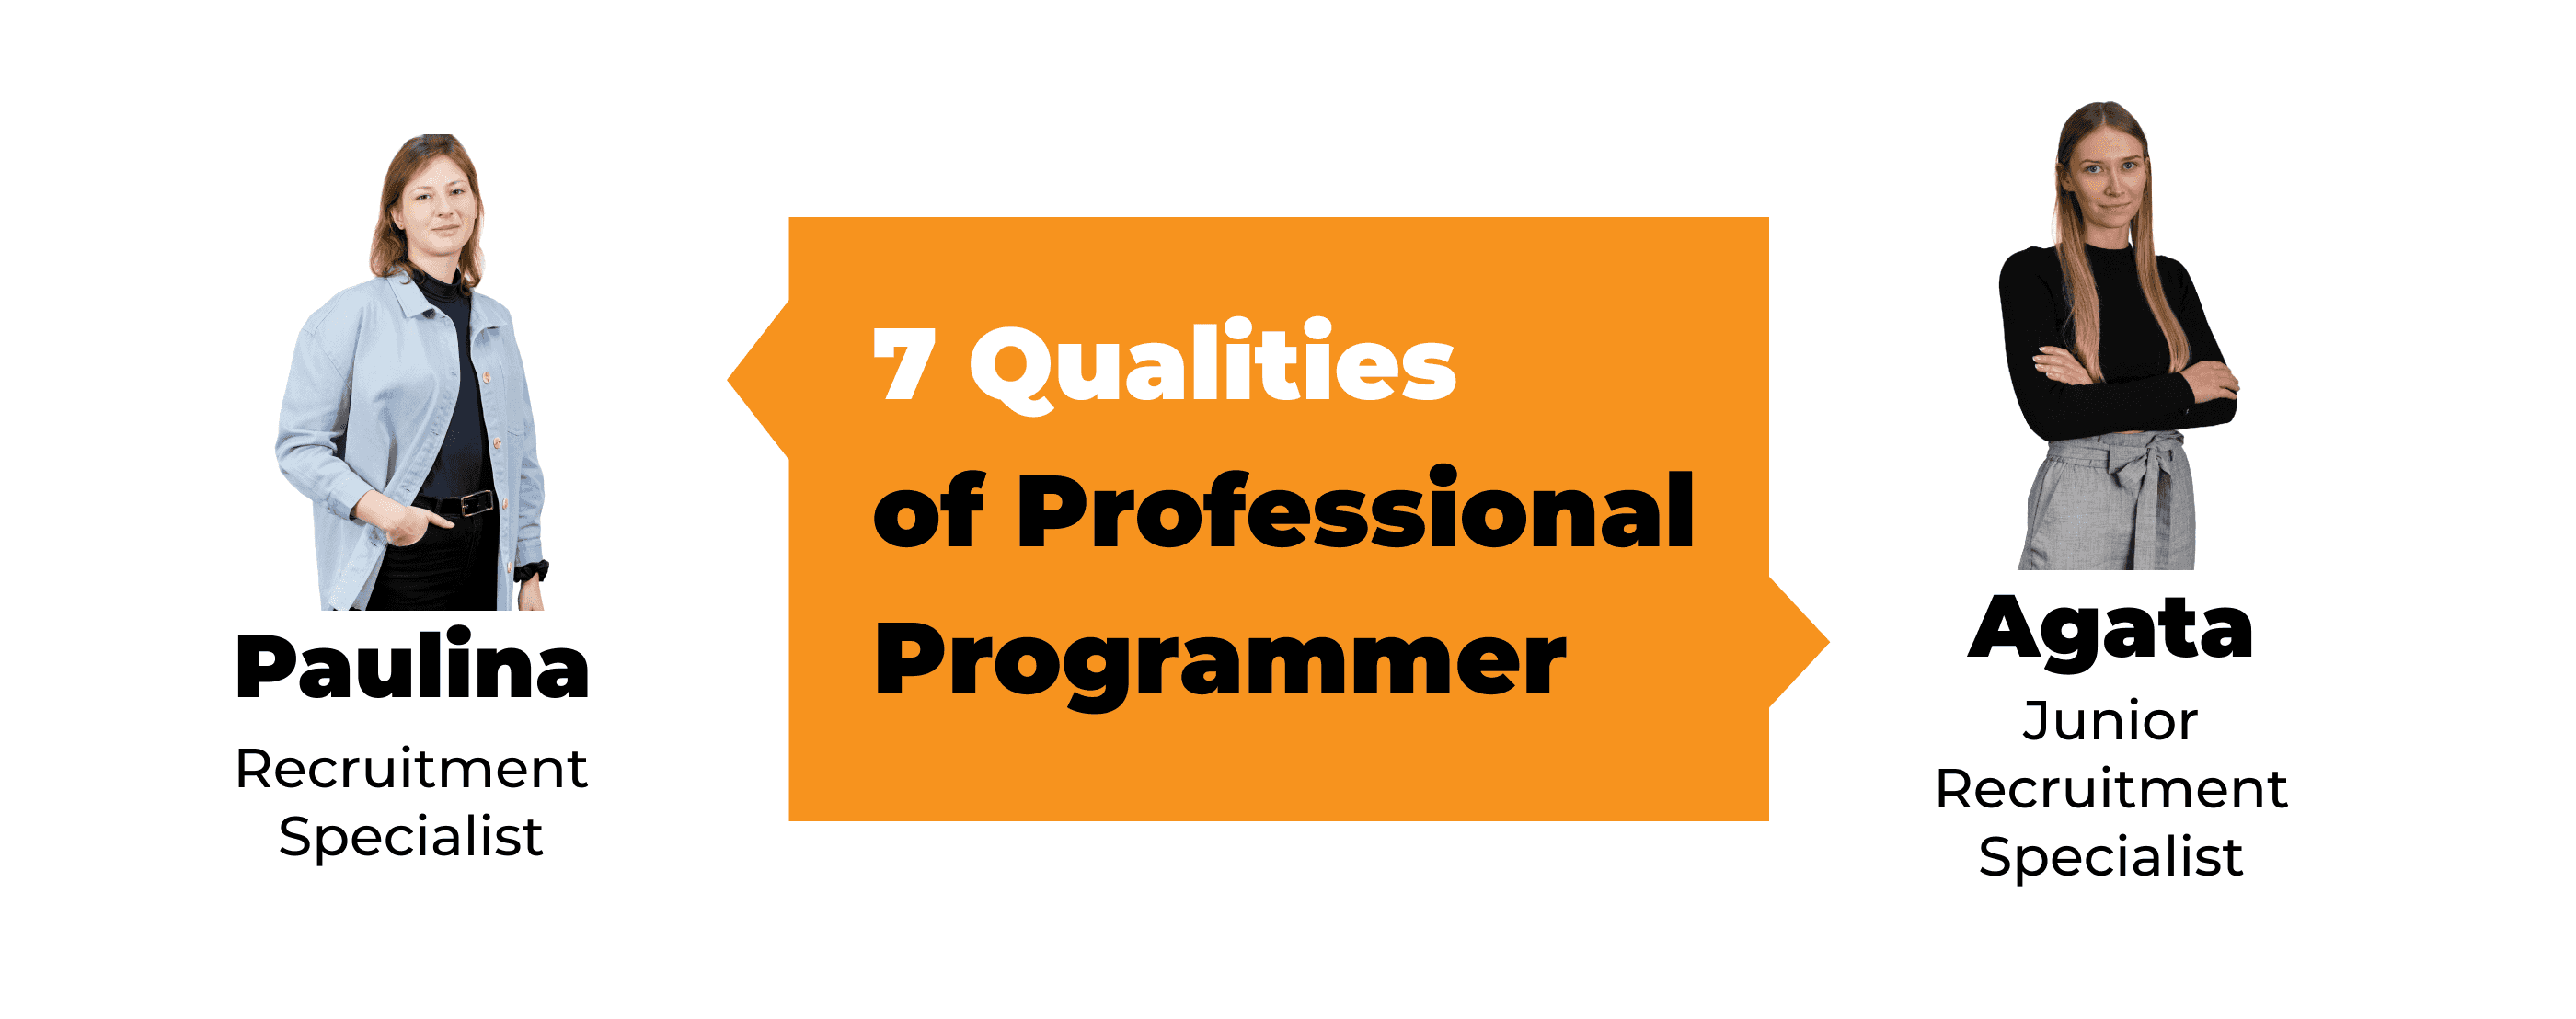 7 Qualities of Professional Programmer